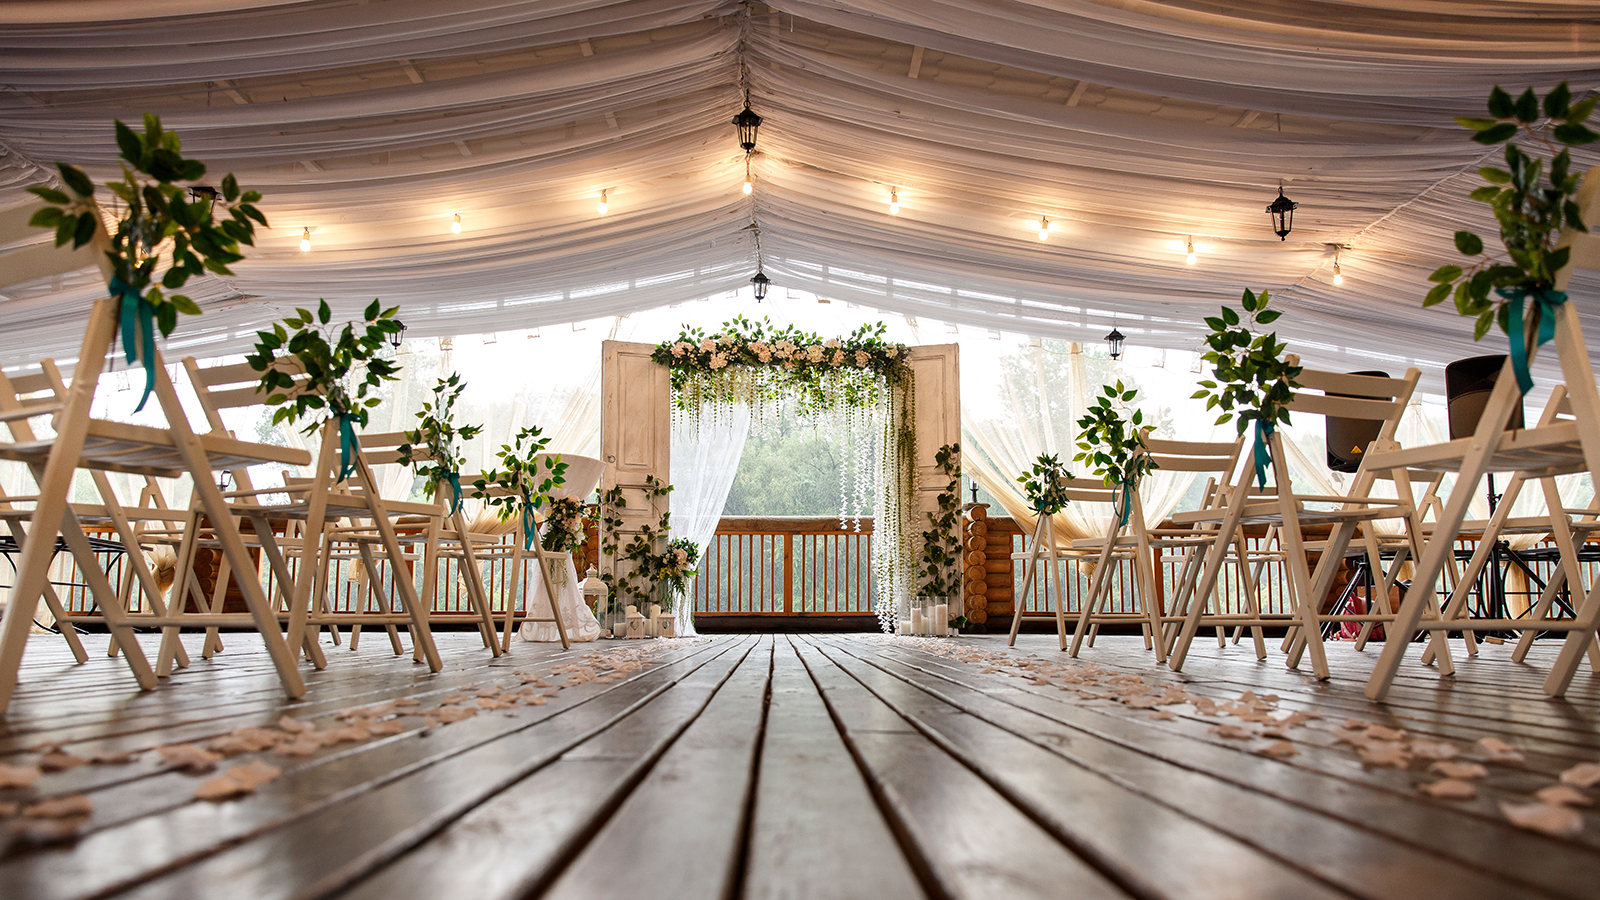 Wedding arch for wedding ceremony. Beautiful wedding decor in rustic style and chairs for guests